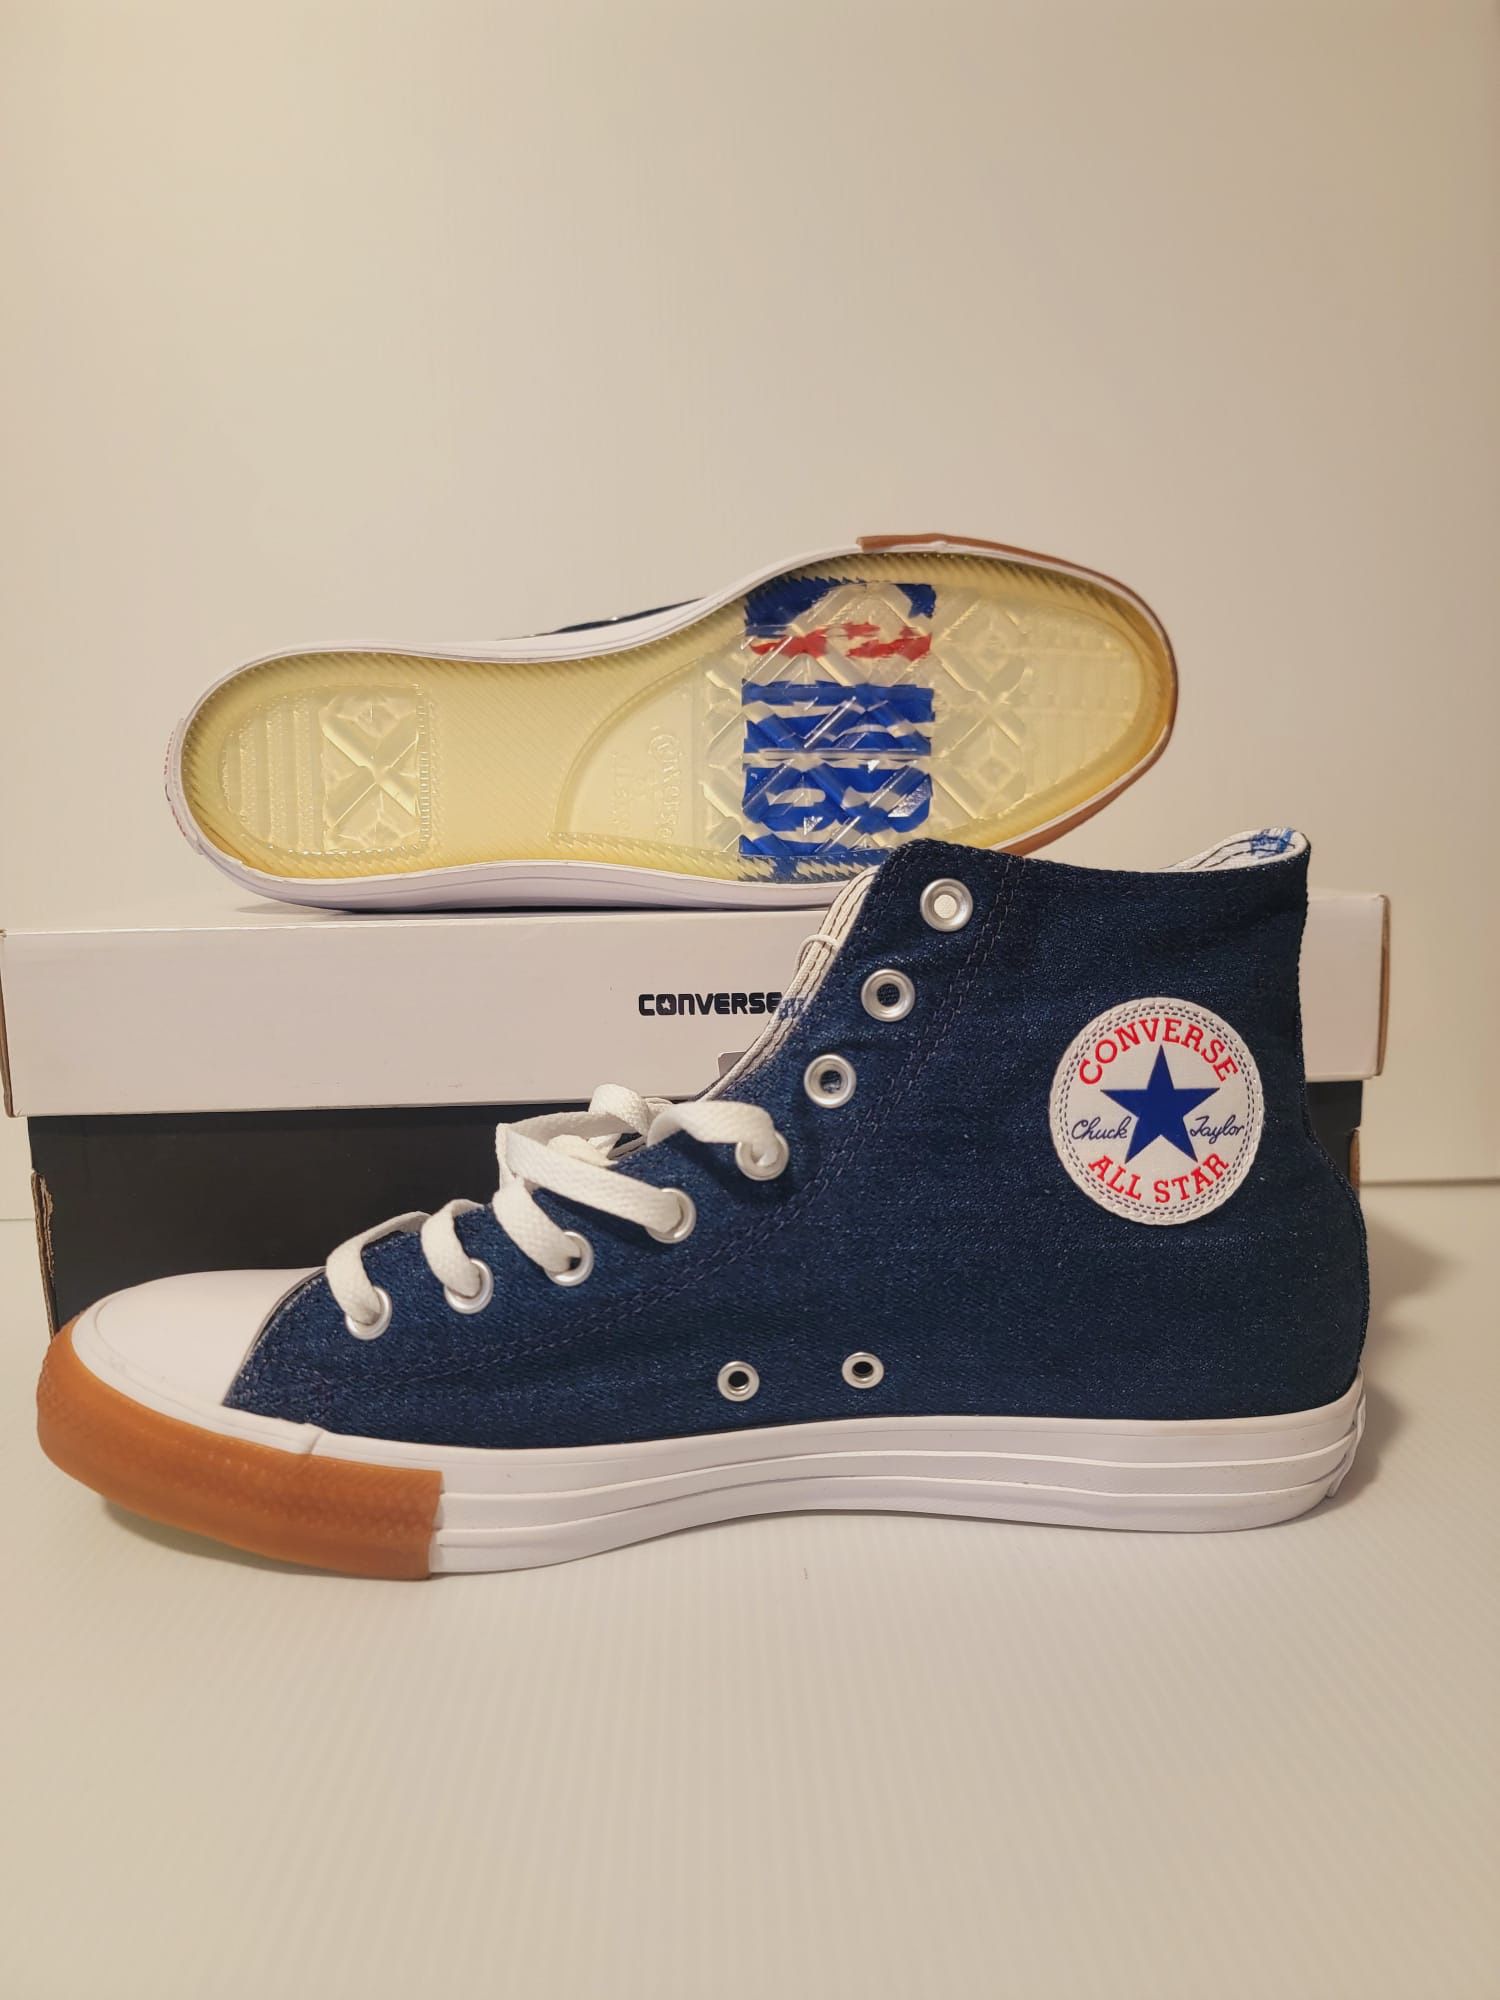 CHAMPIONSHIP CONVERSE 10 for Sale in Queens, NY OfferUp